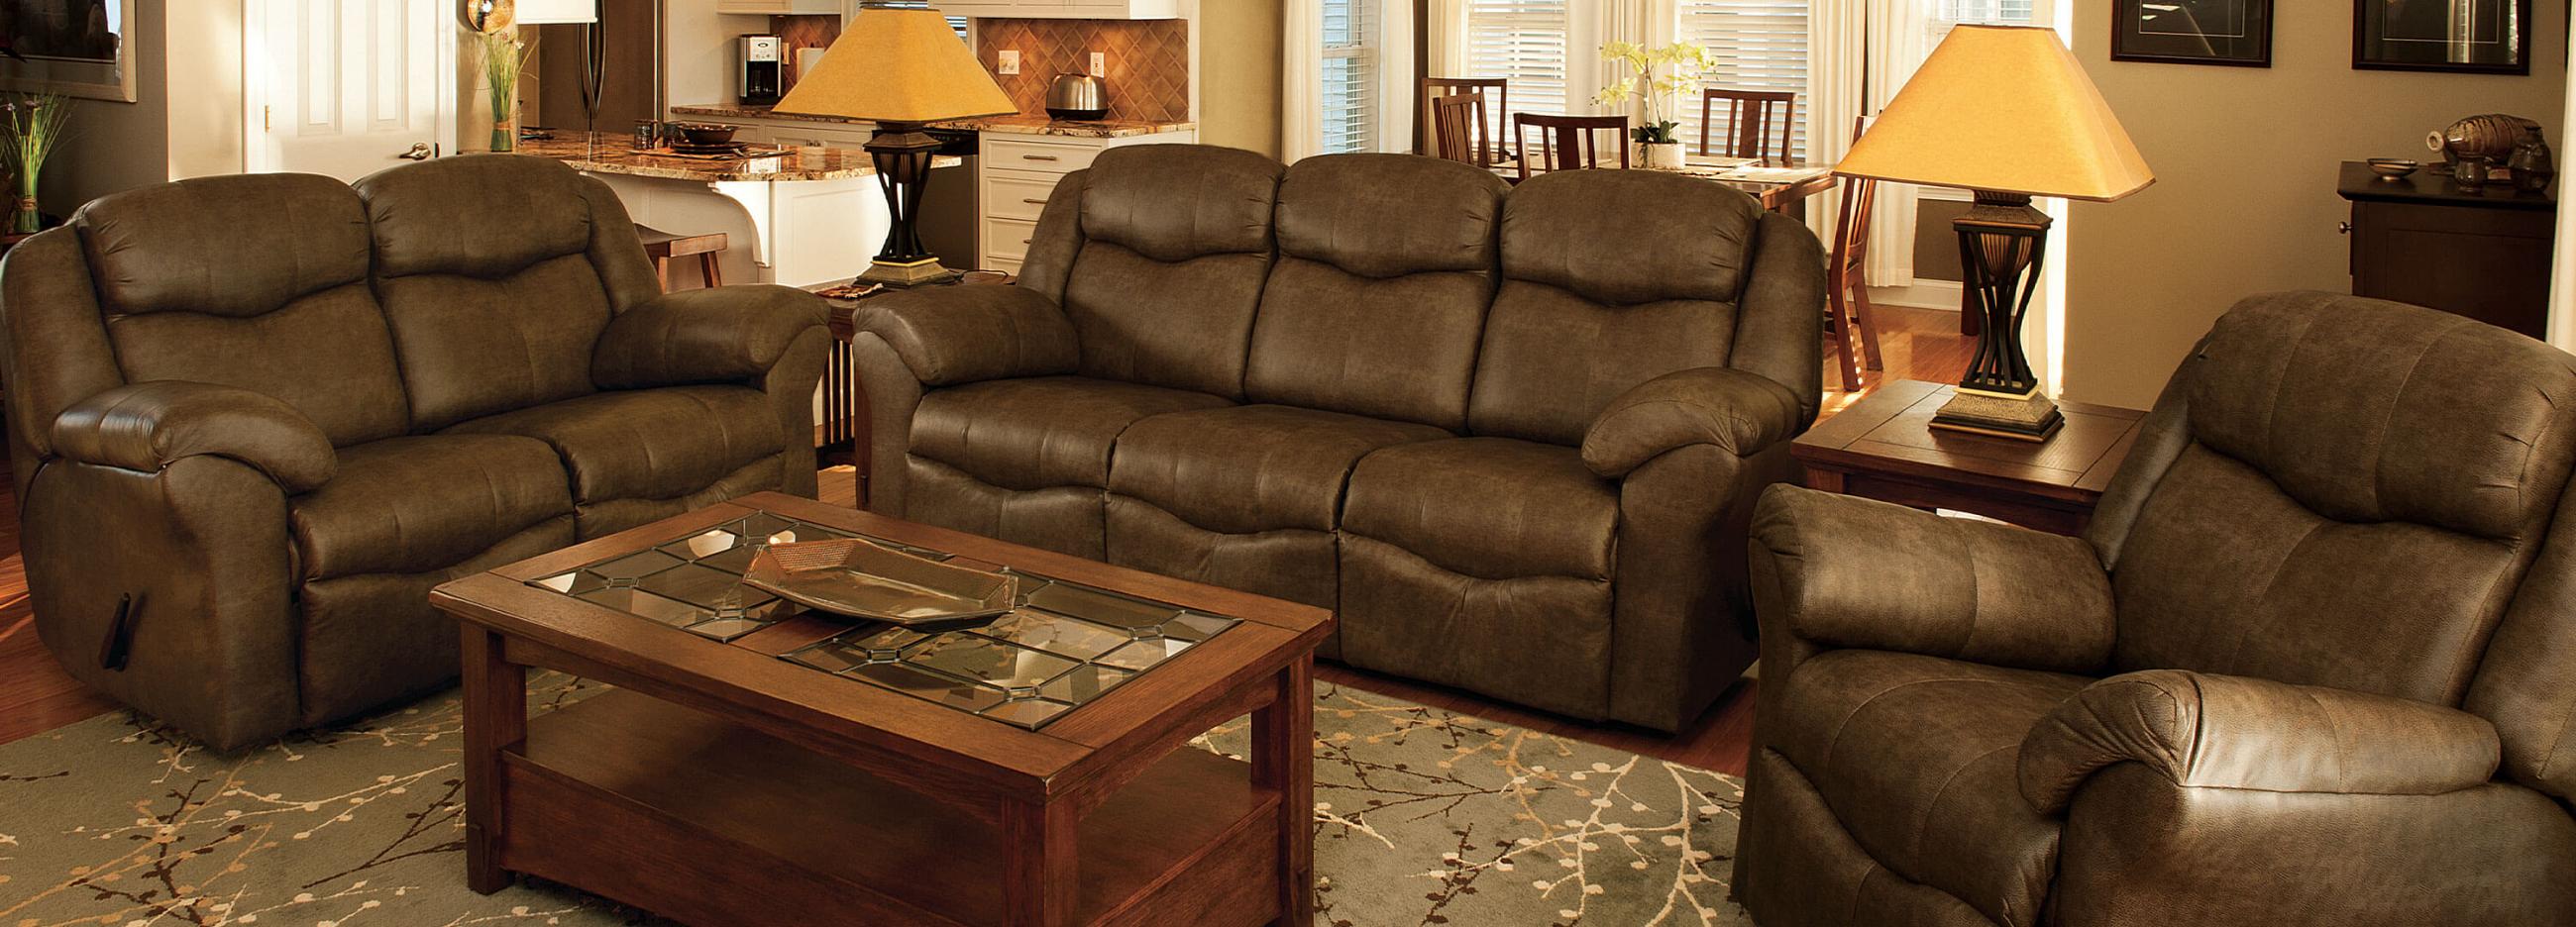 Lambright Comfort Chairs Living Room Furniture